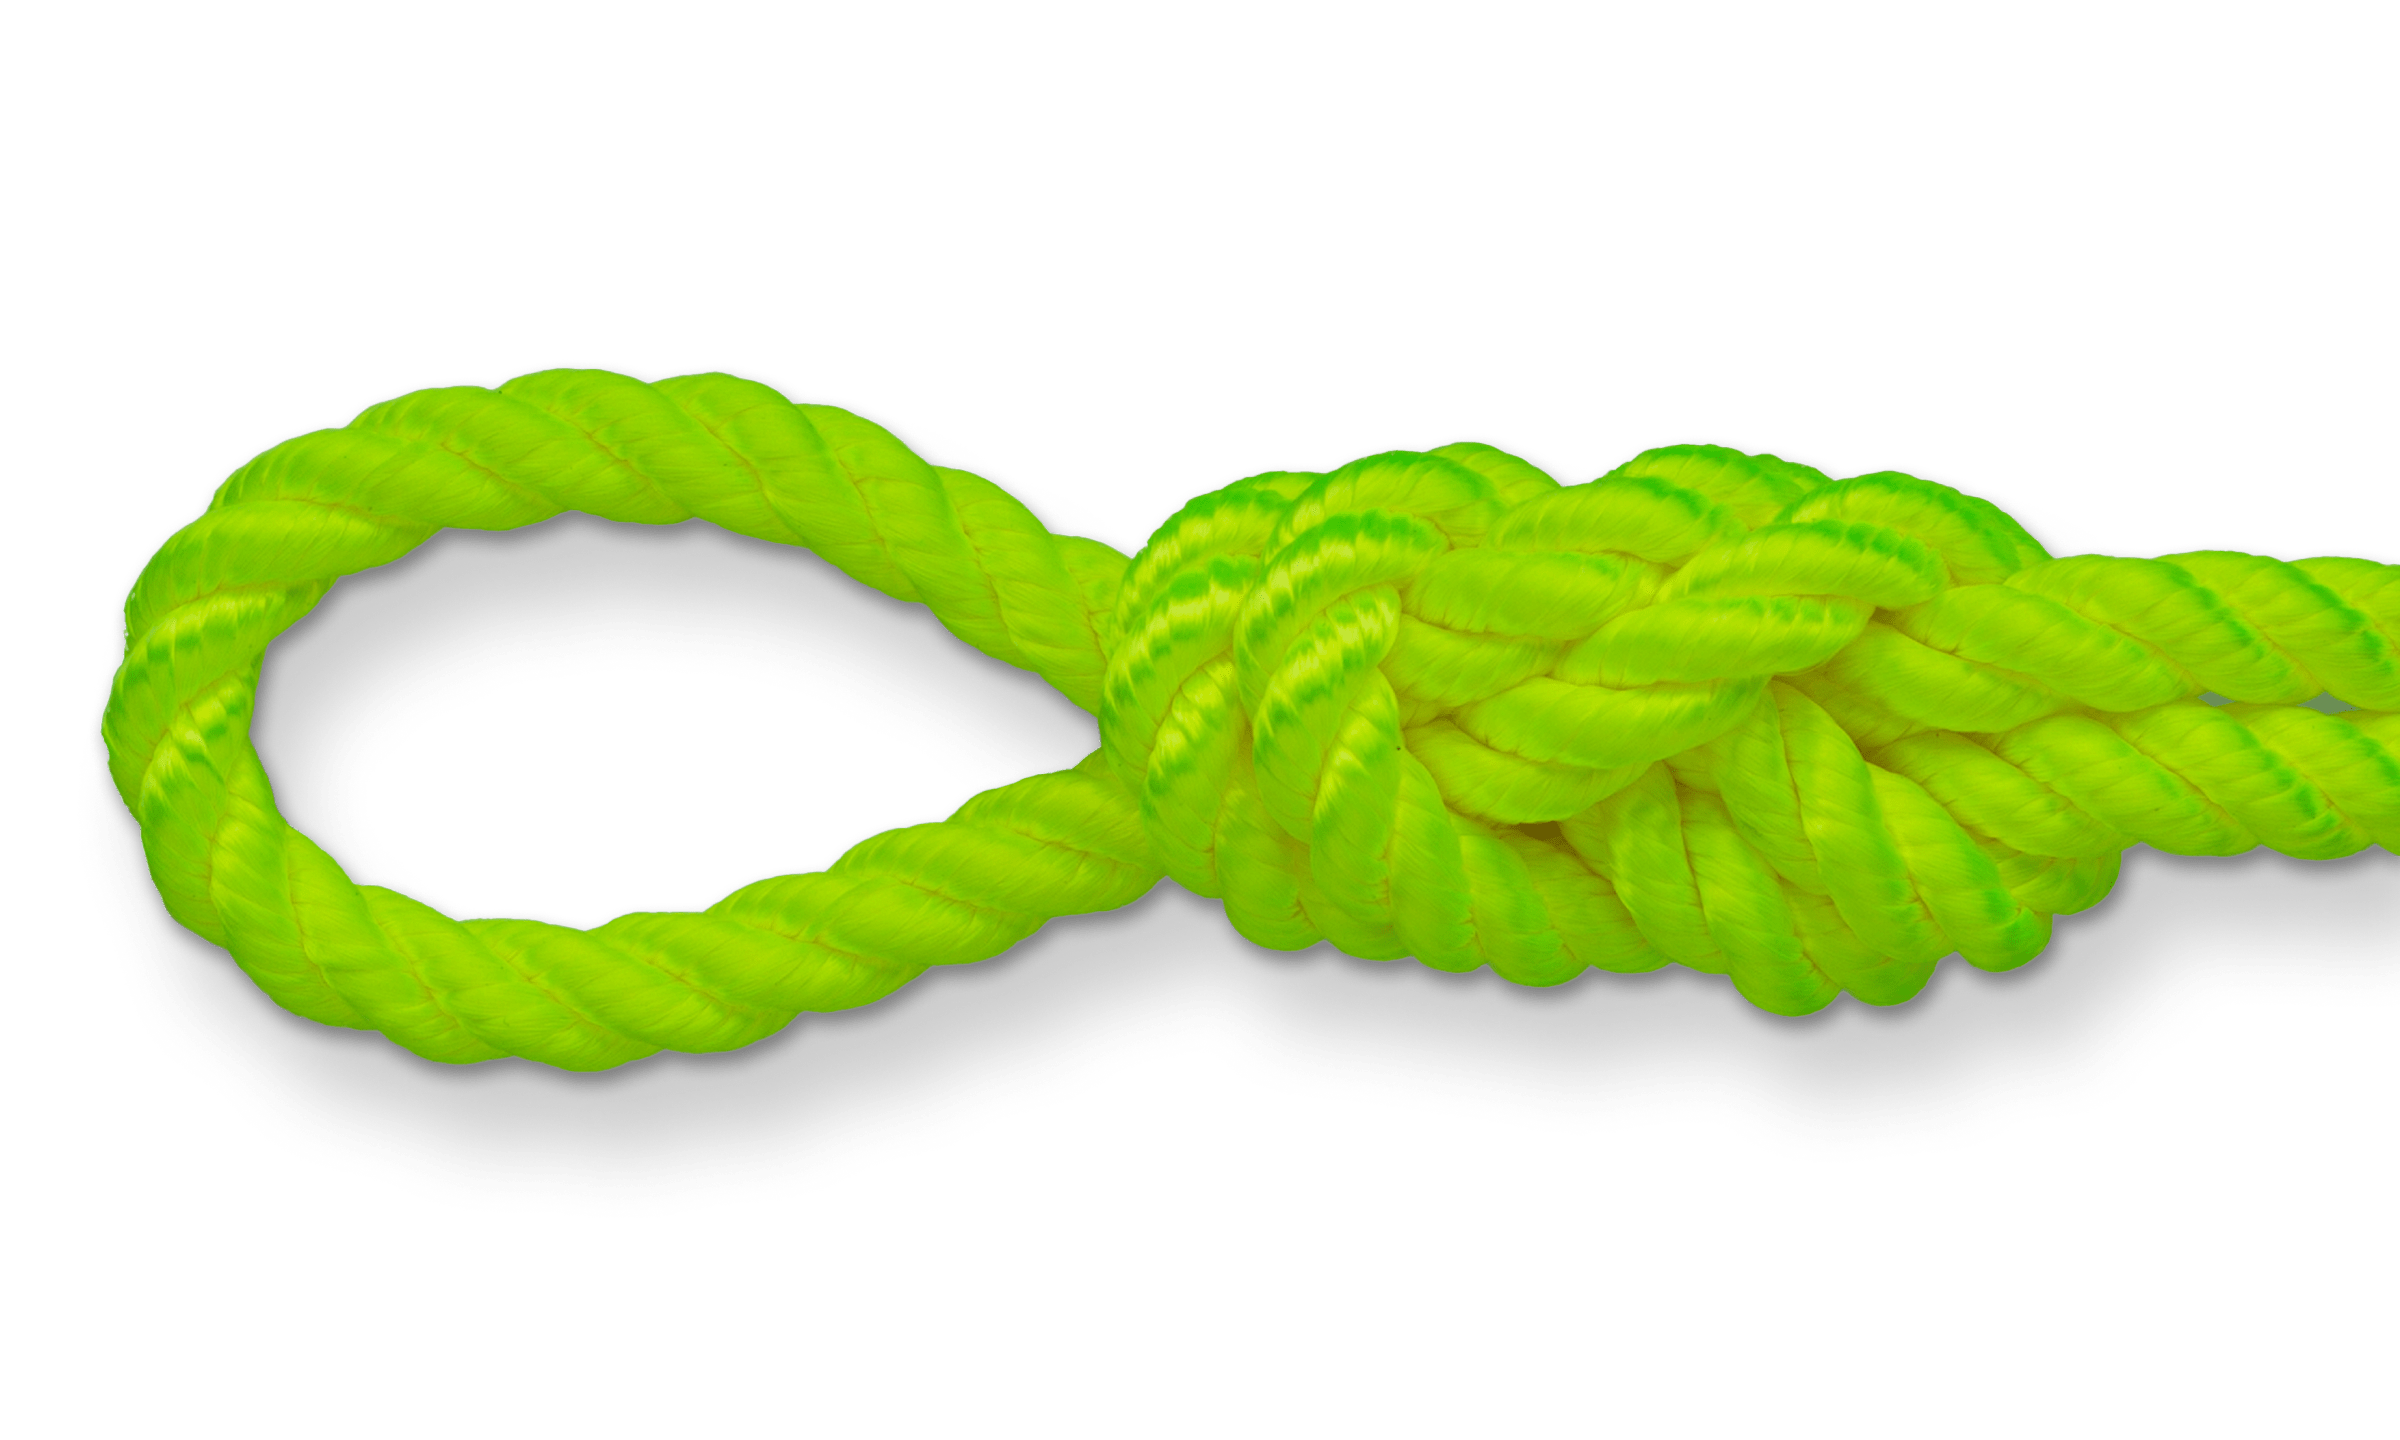 3-strand twisted neon yellow rope